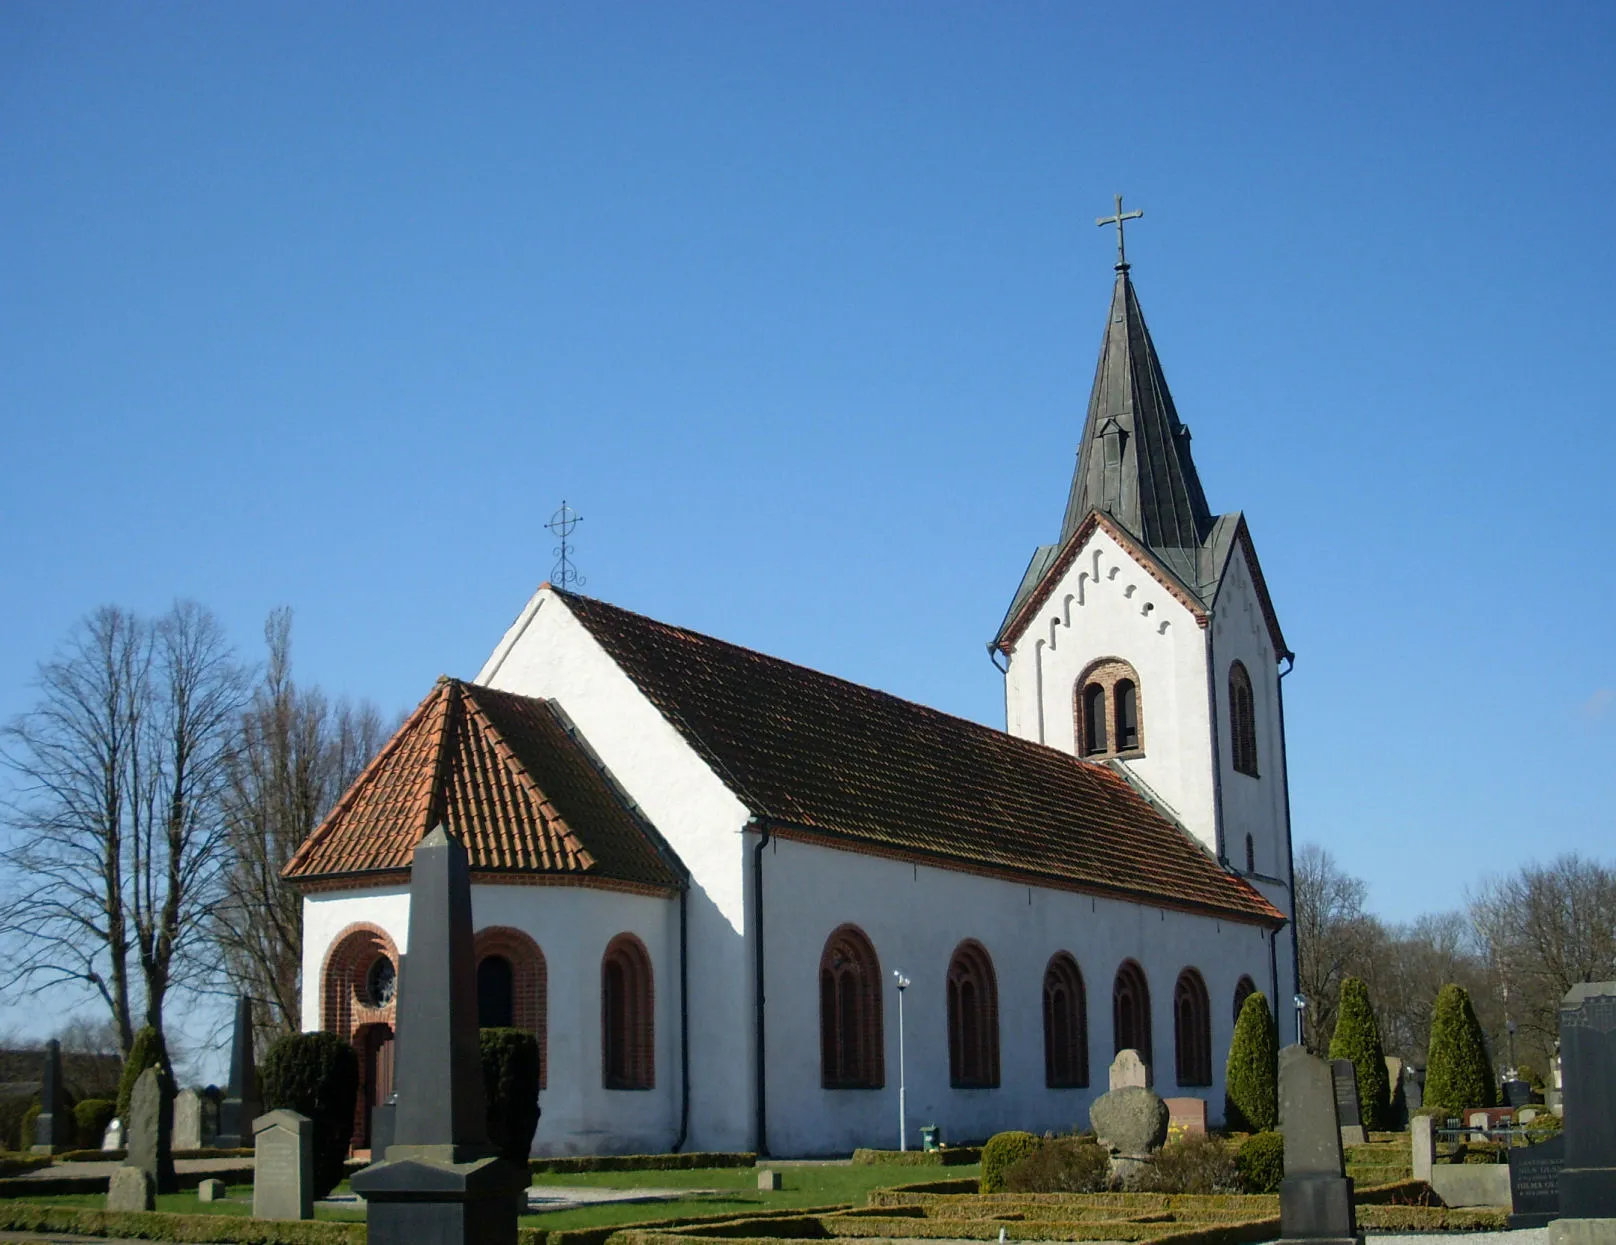 Photo showing: The church of Kyrkheddinge in southern Sweden